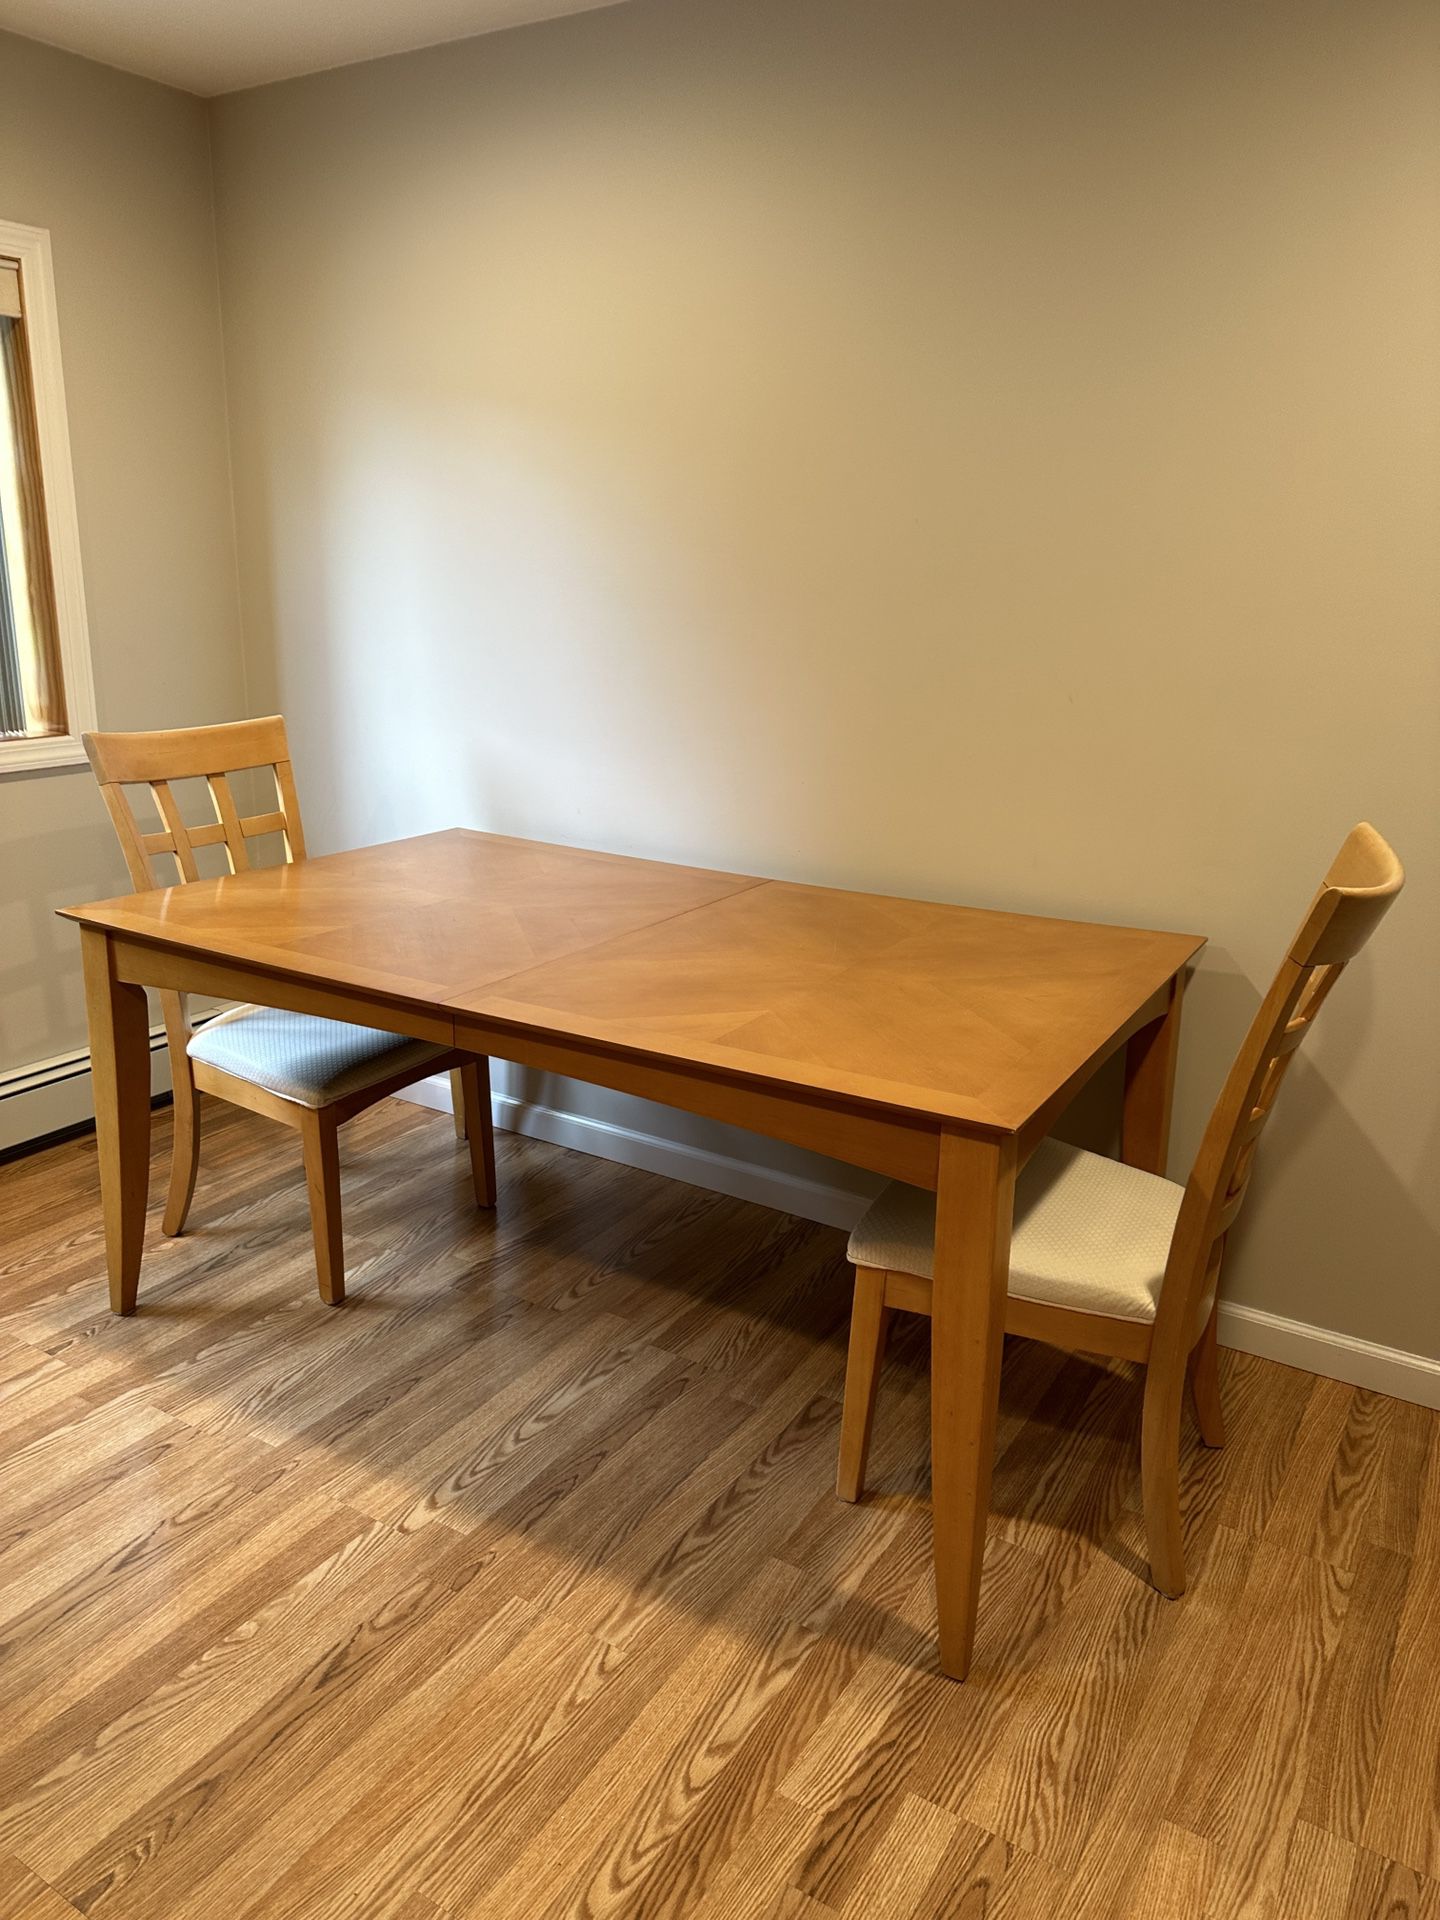 Dining Table With Chairs, Hardwood